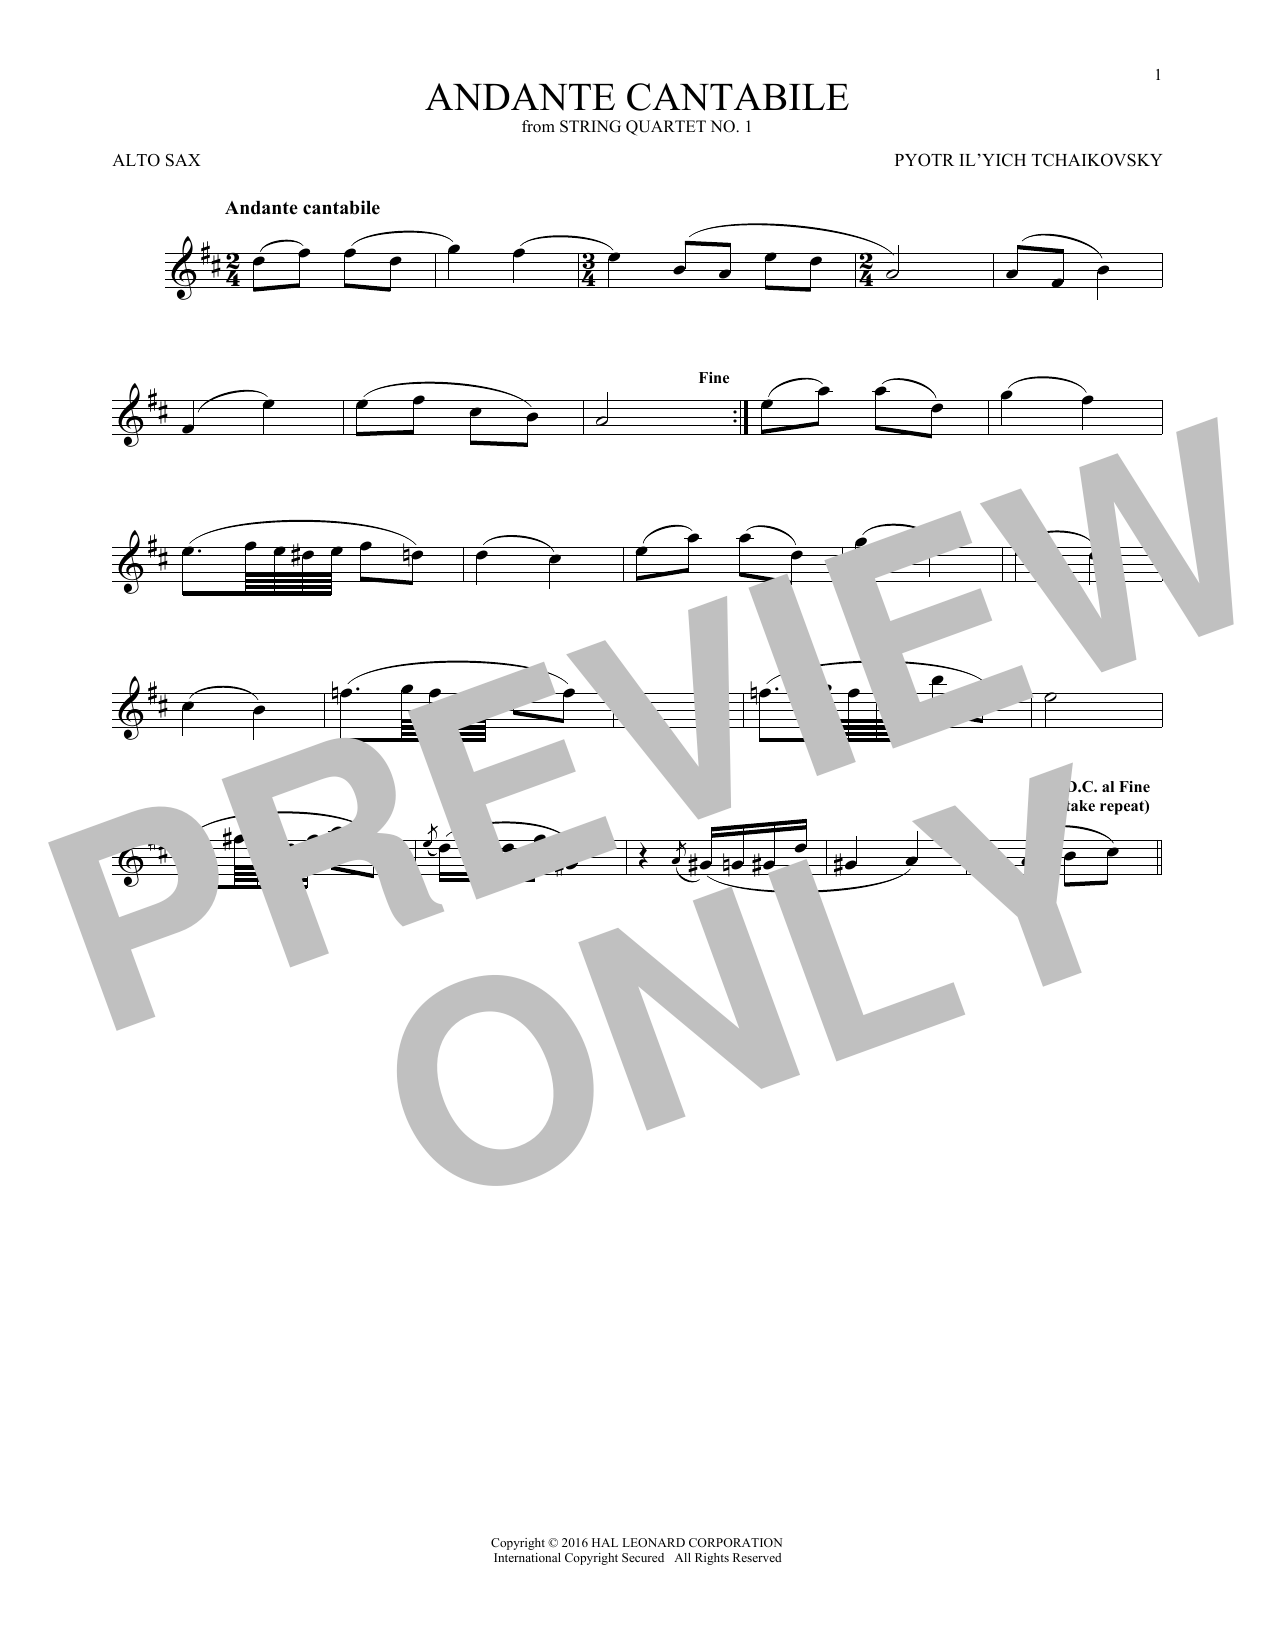 Download Pyotr Il'yich Tchaikovsky Andante Cantabile Sheet Music